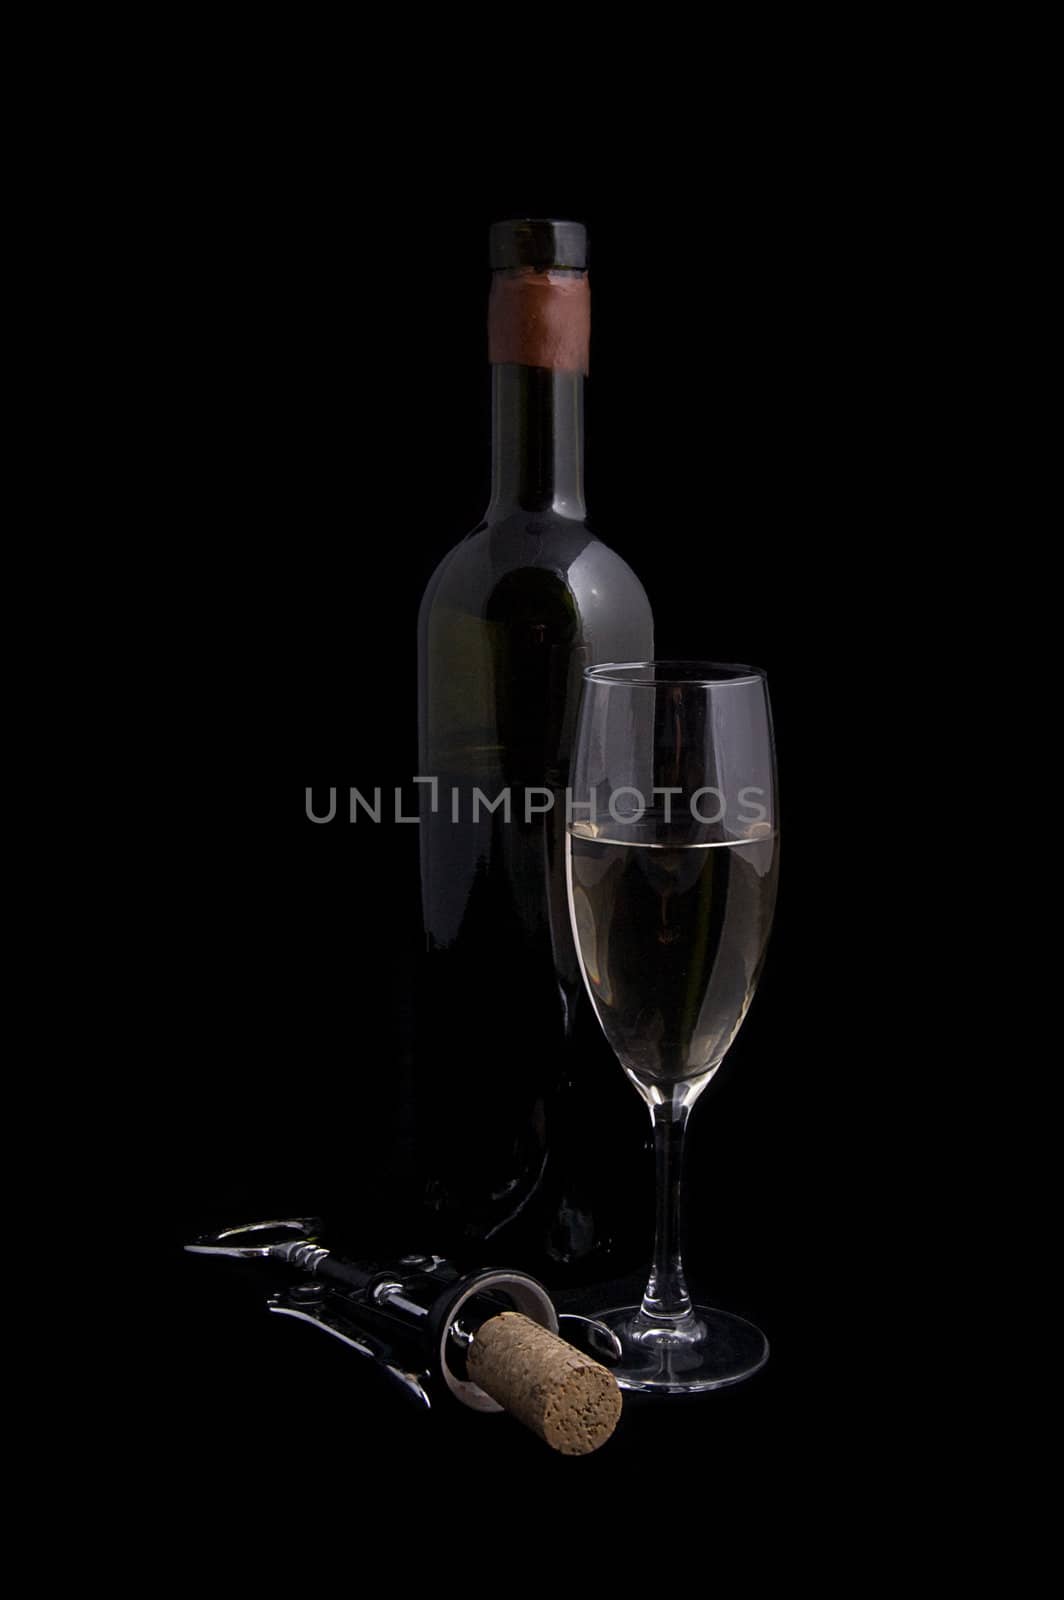 White wine bottle and glass with corkscrew over black